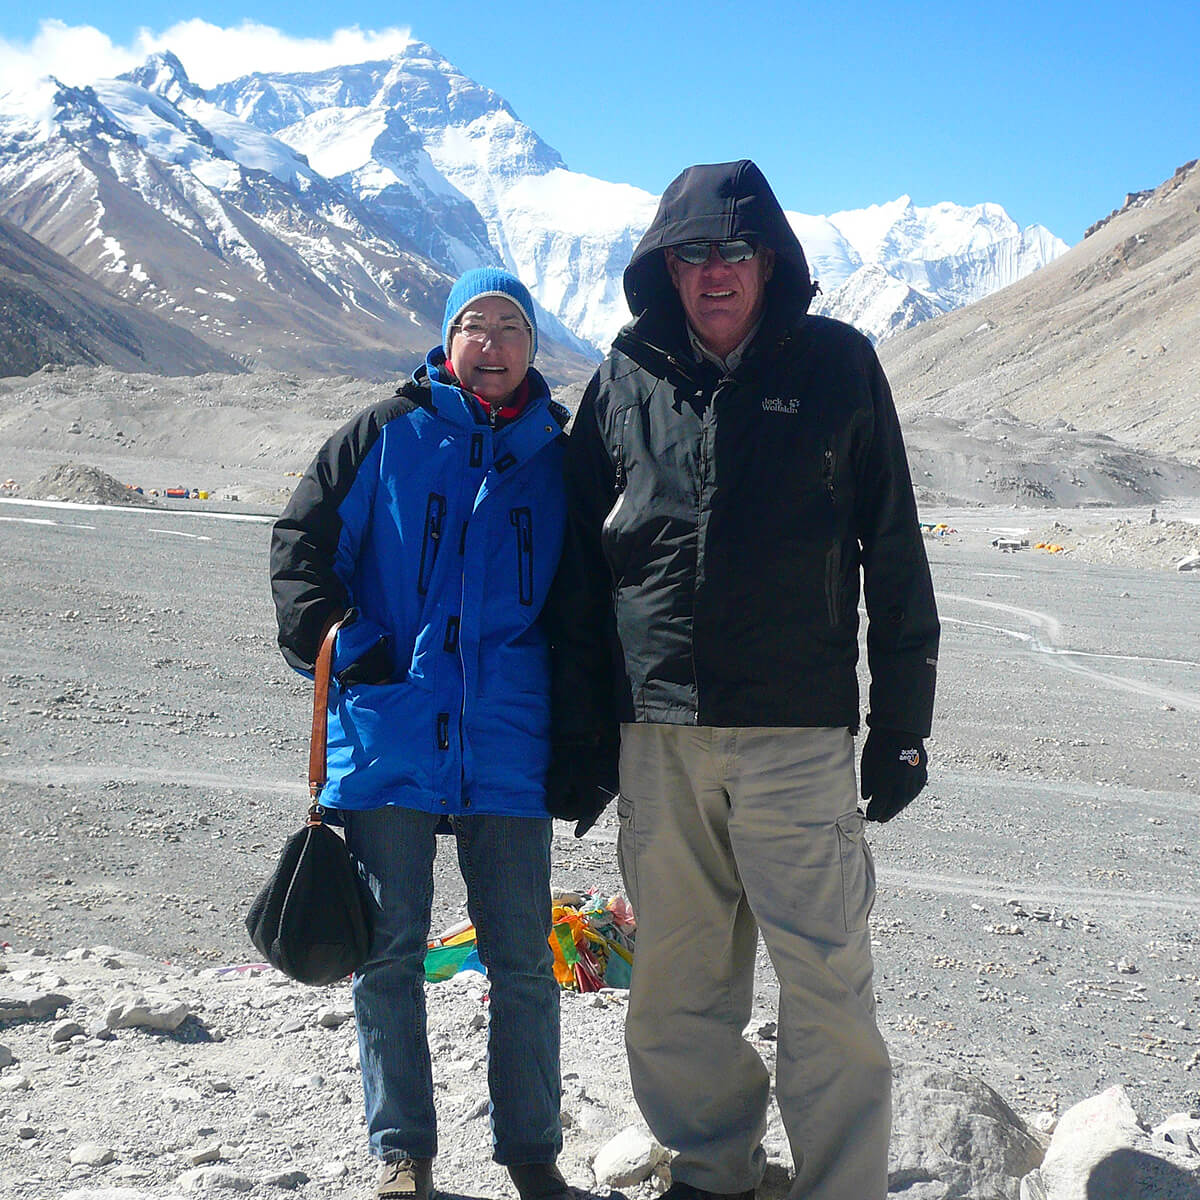 Brenda and John stand together smiling wearing winter clothes on rocky terrain with the snow caps of Mount Everest in the background